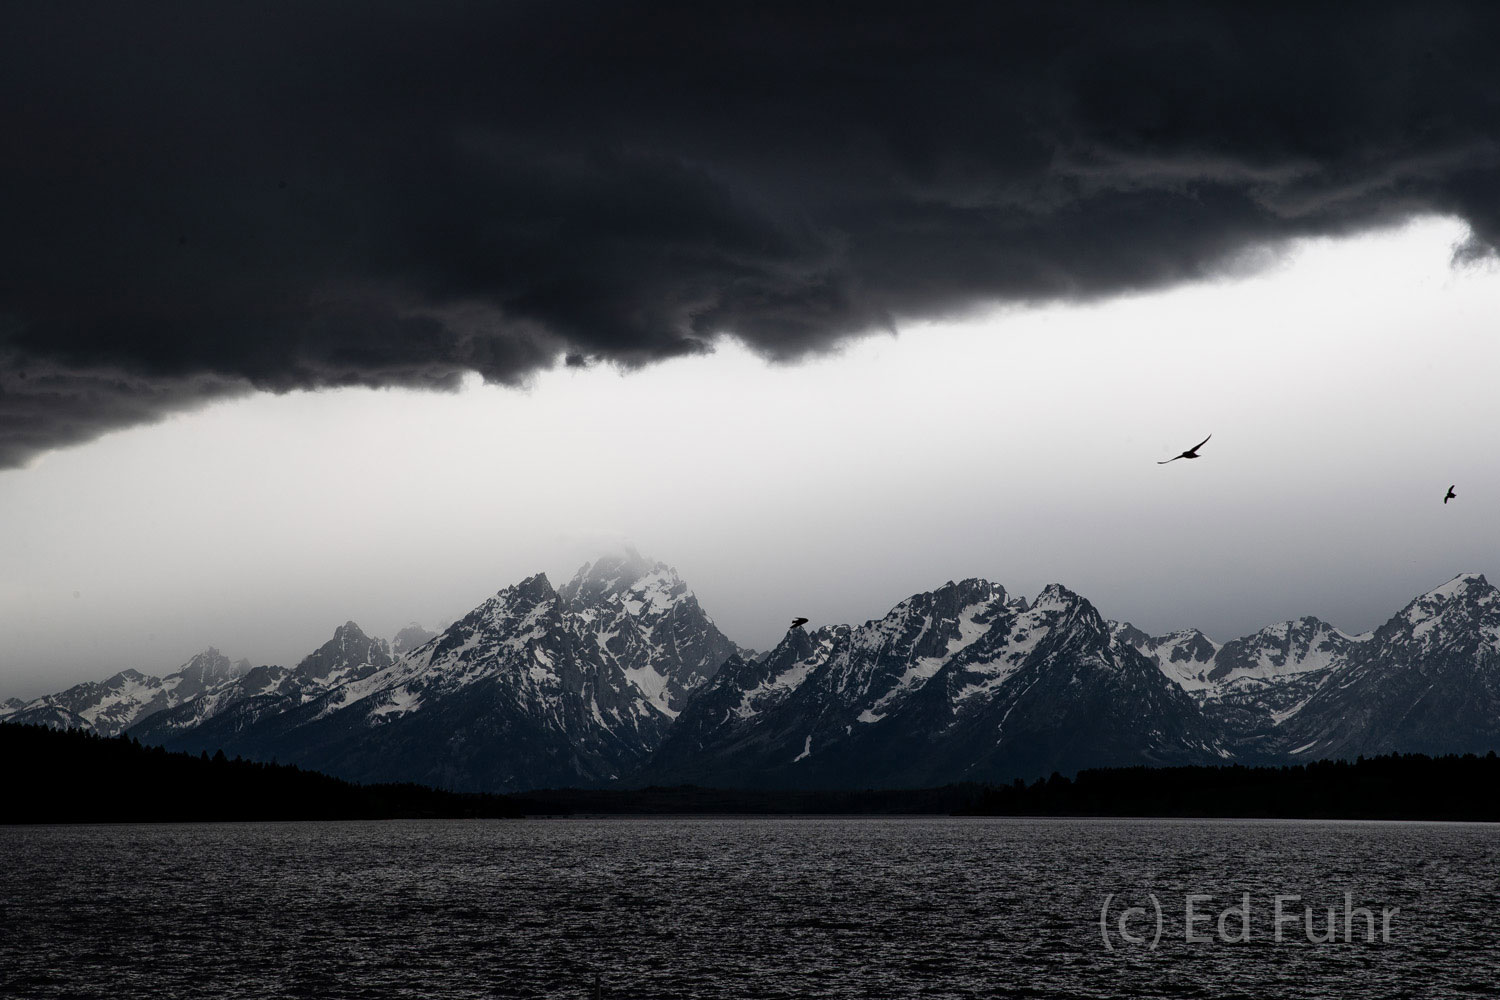 The high peaks of the Teton range can trigger powerful thunderstorms, especially in summer.